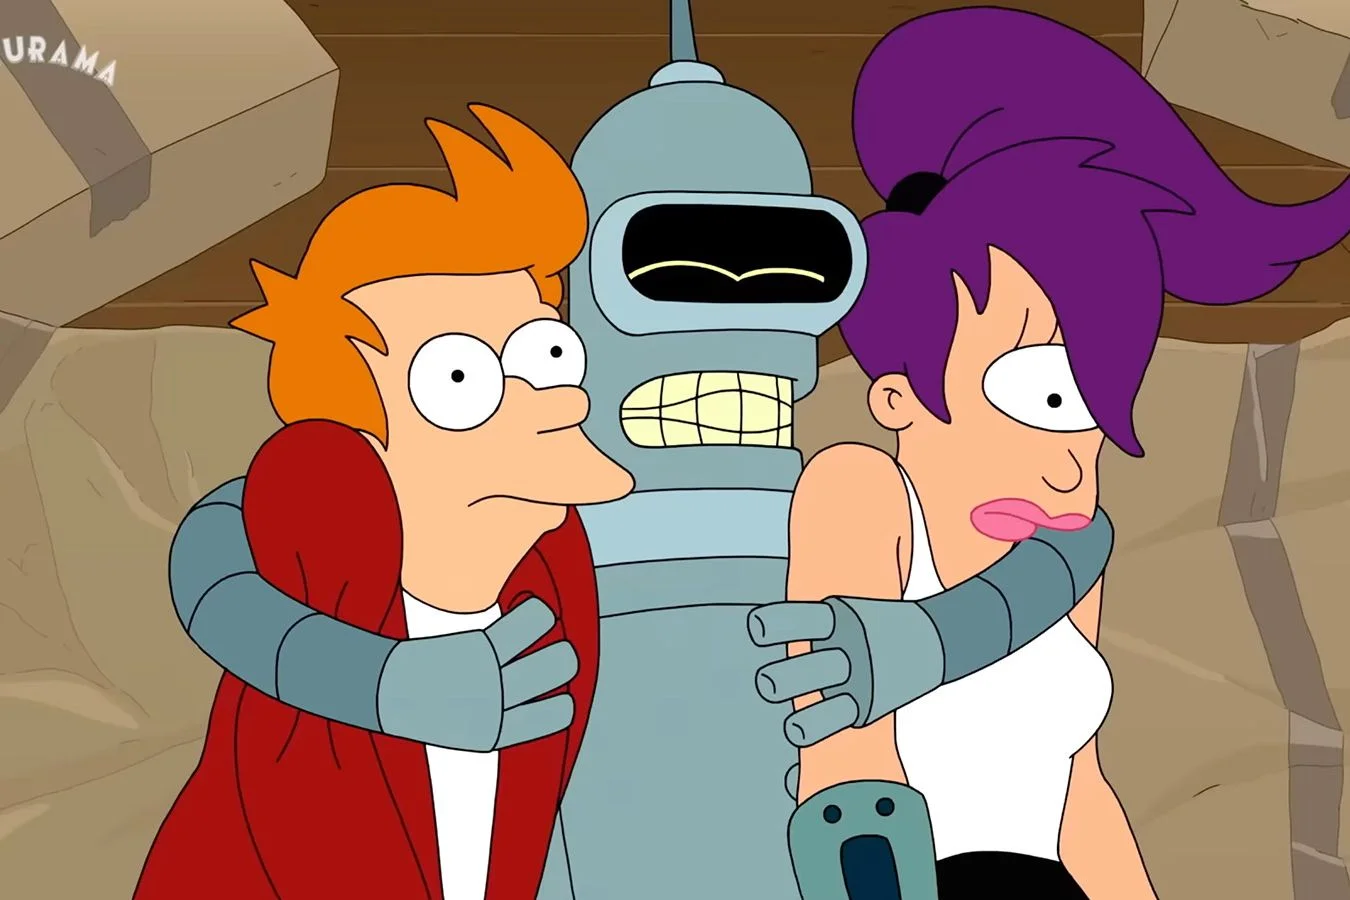 The collaboration of the animated series "Futurama" and Fortnite has begun